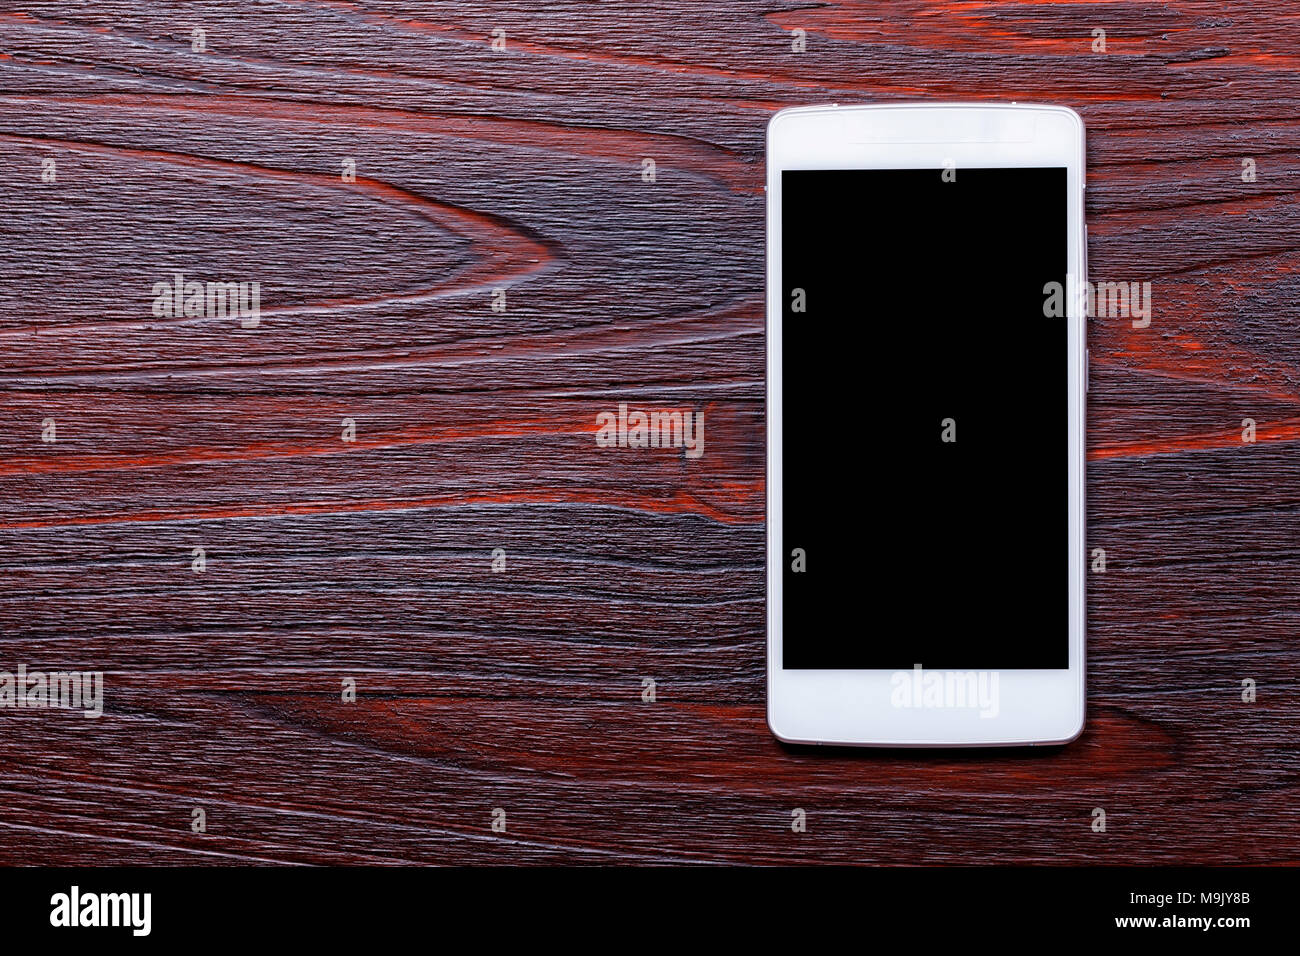 White smart phone template with black screen on top of a mahogany wood table. Stock Photo